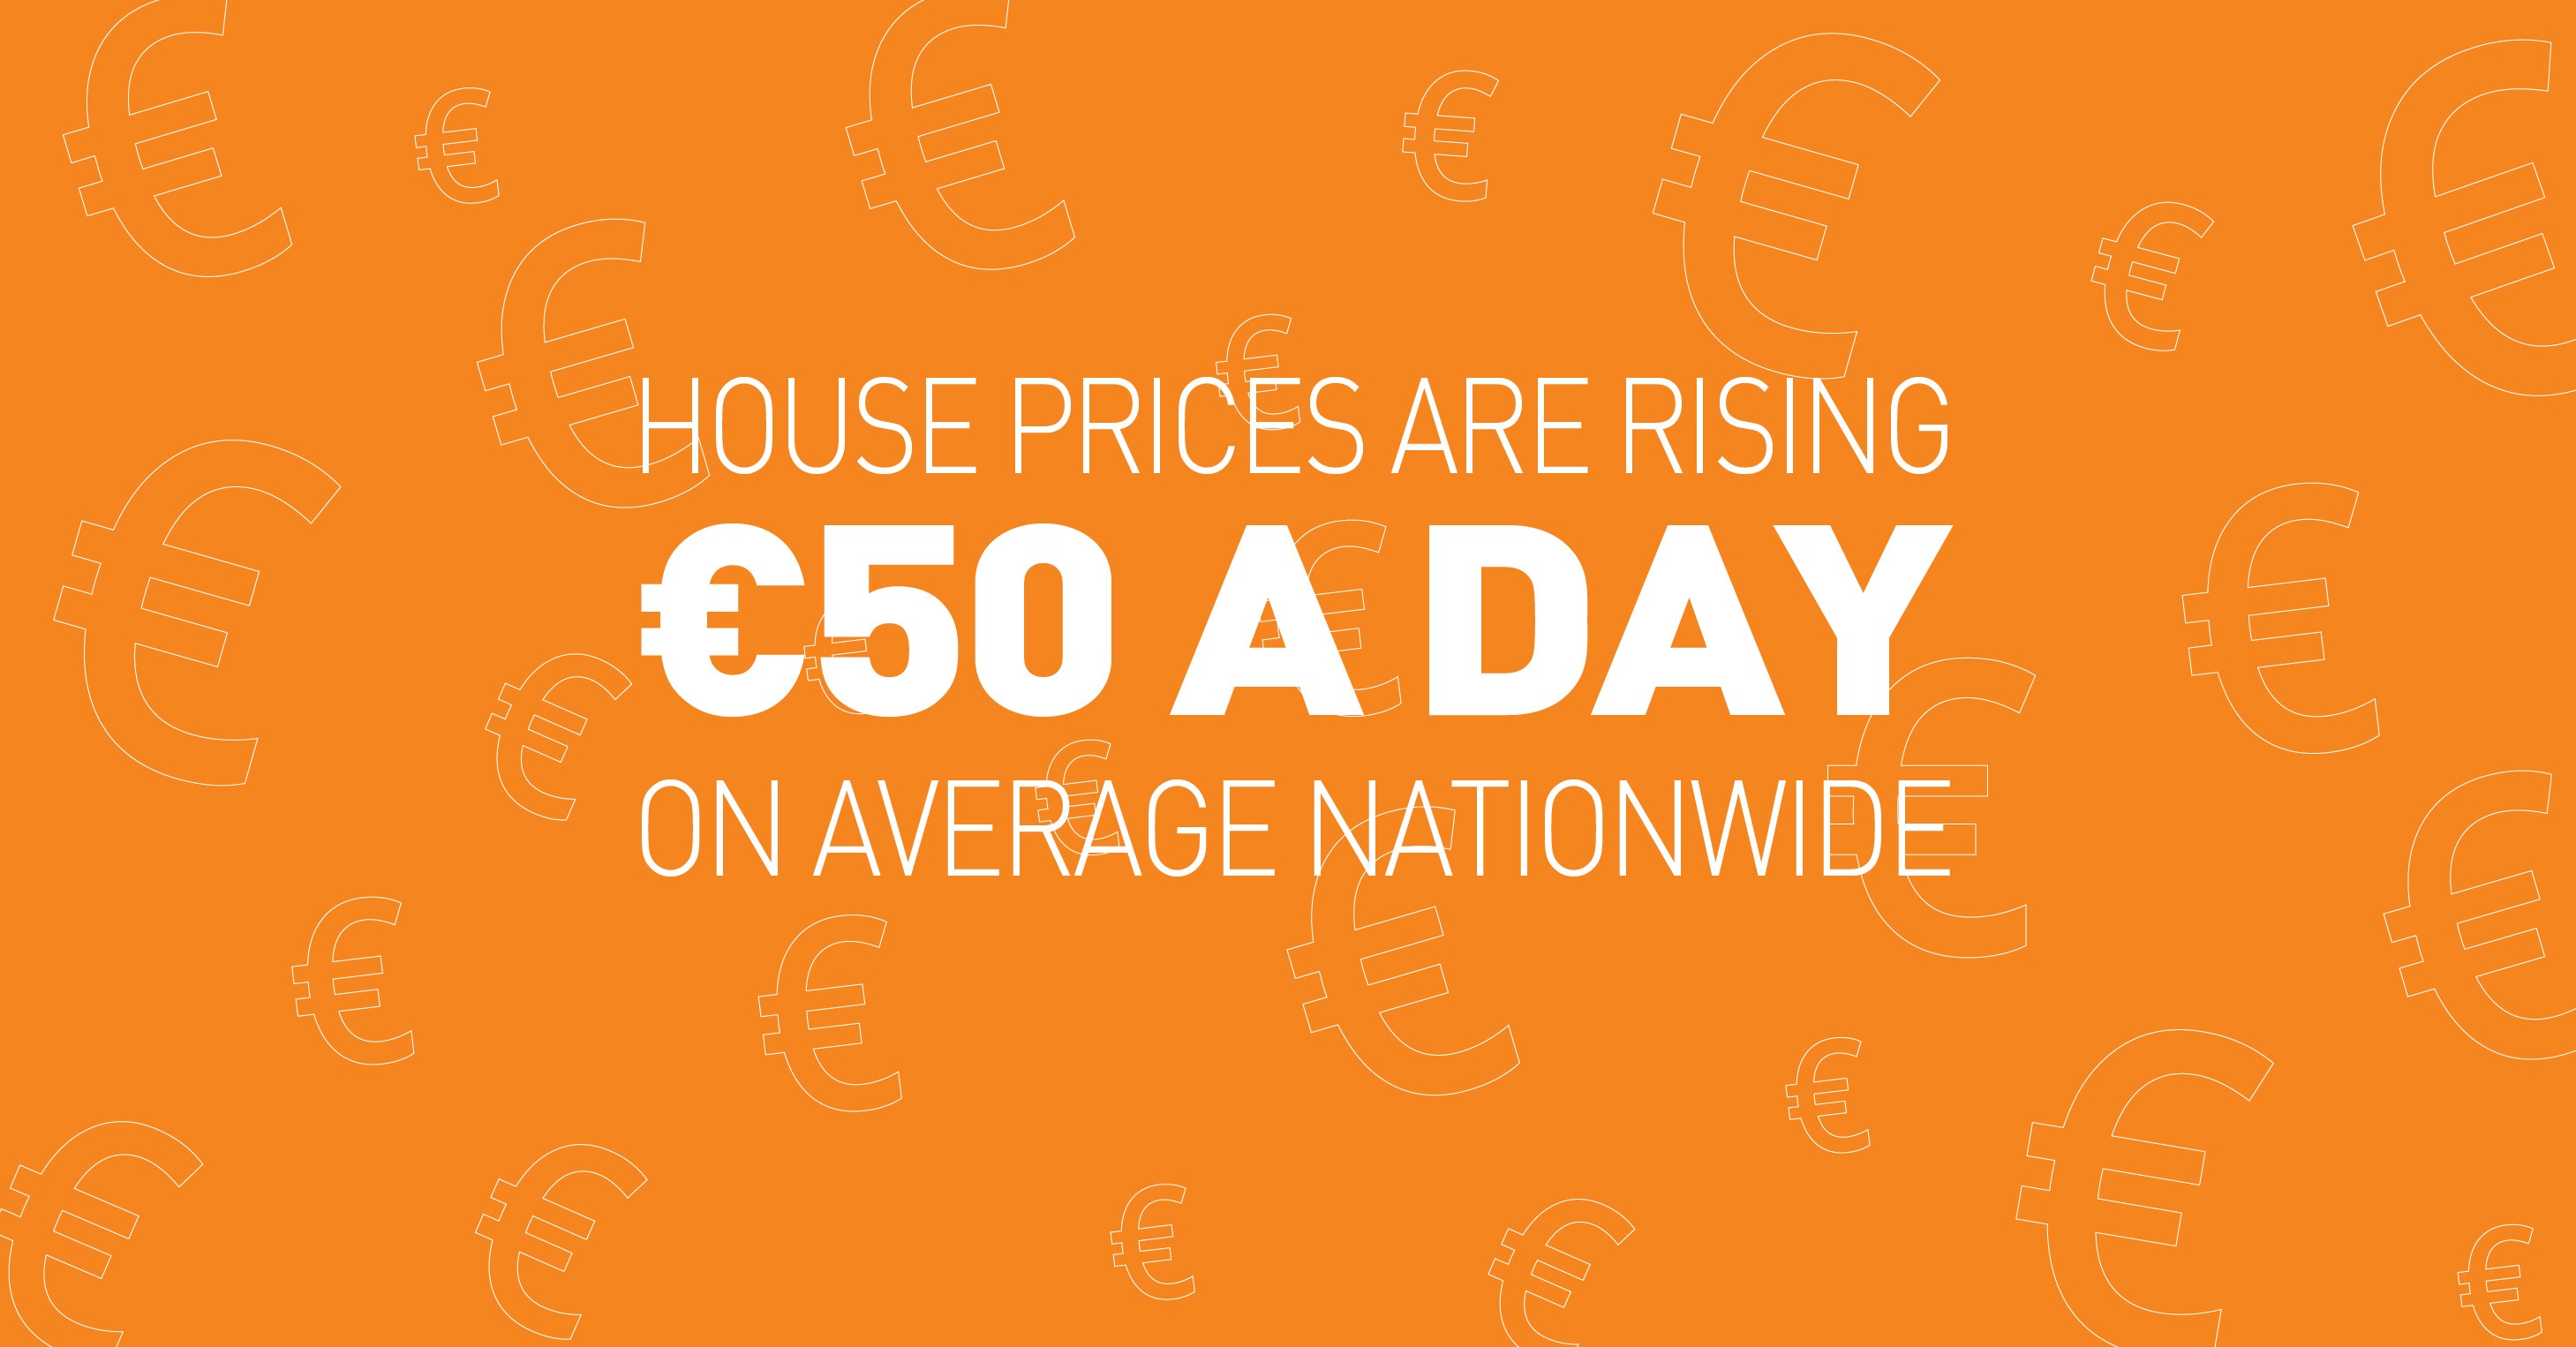 House prices are raising €50 a day on average nationwide